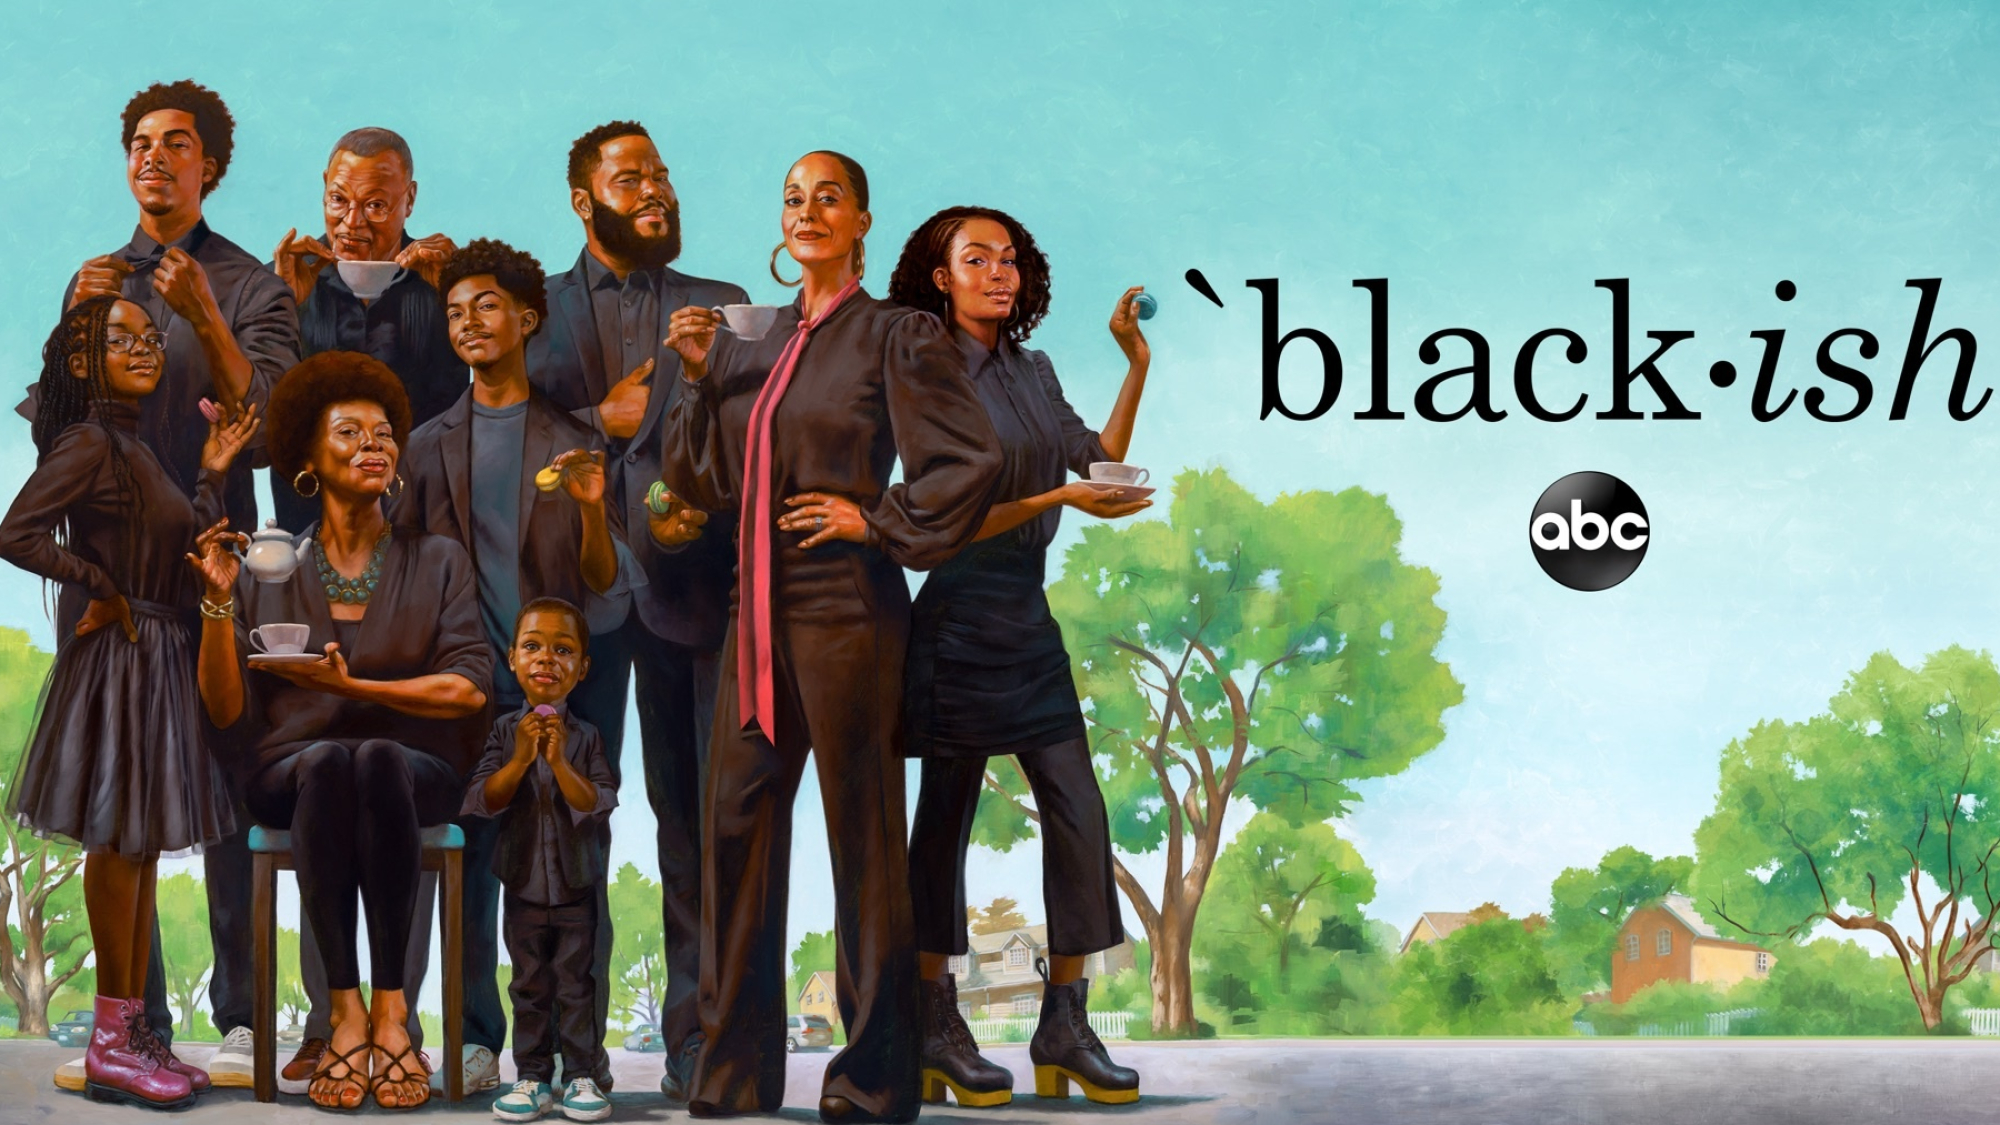 Black-ish TV series, HD wallpapers and backgrounds, Variety of images, 2000x1130 HD Desktop